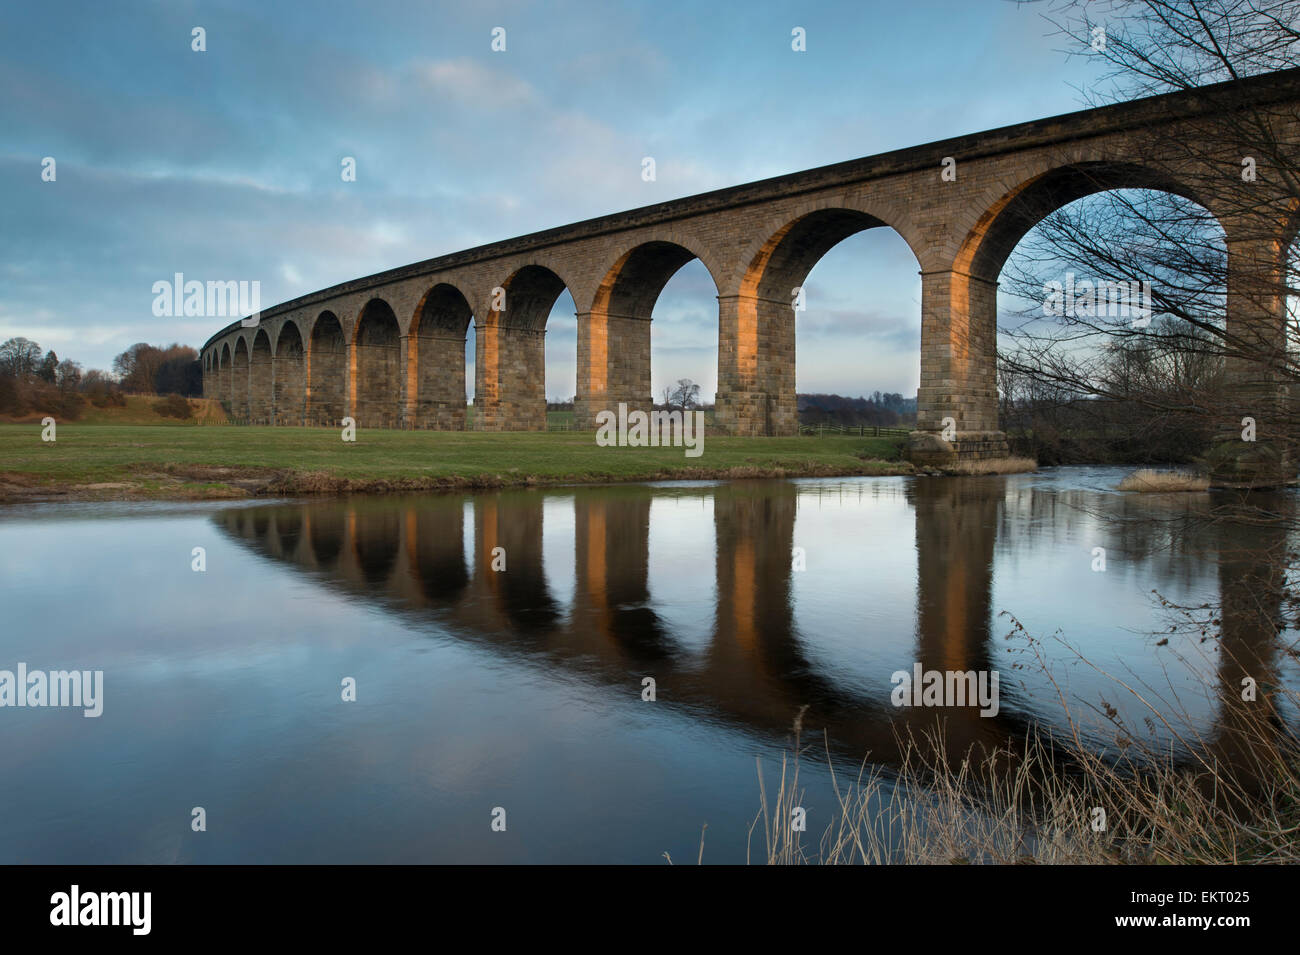 Under bright blue sky, arches of Arthington Viaduct railway bridge are  reflected in calm water of the River Wharfe - West Yorkshire, England, UK. Stock Photo